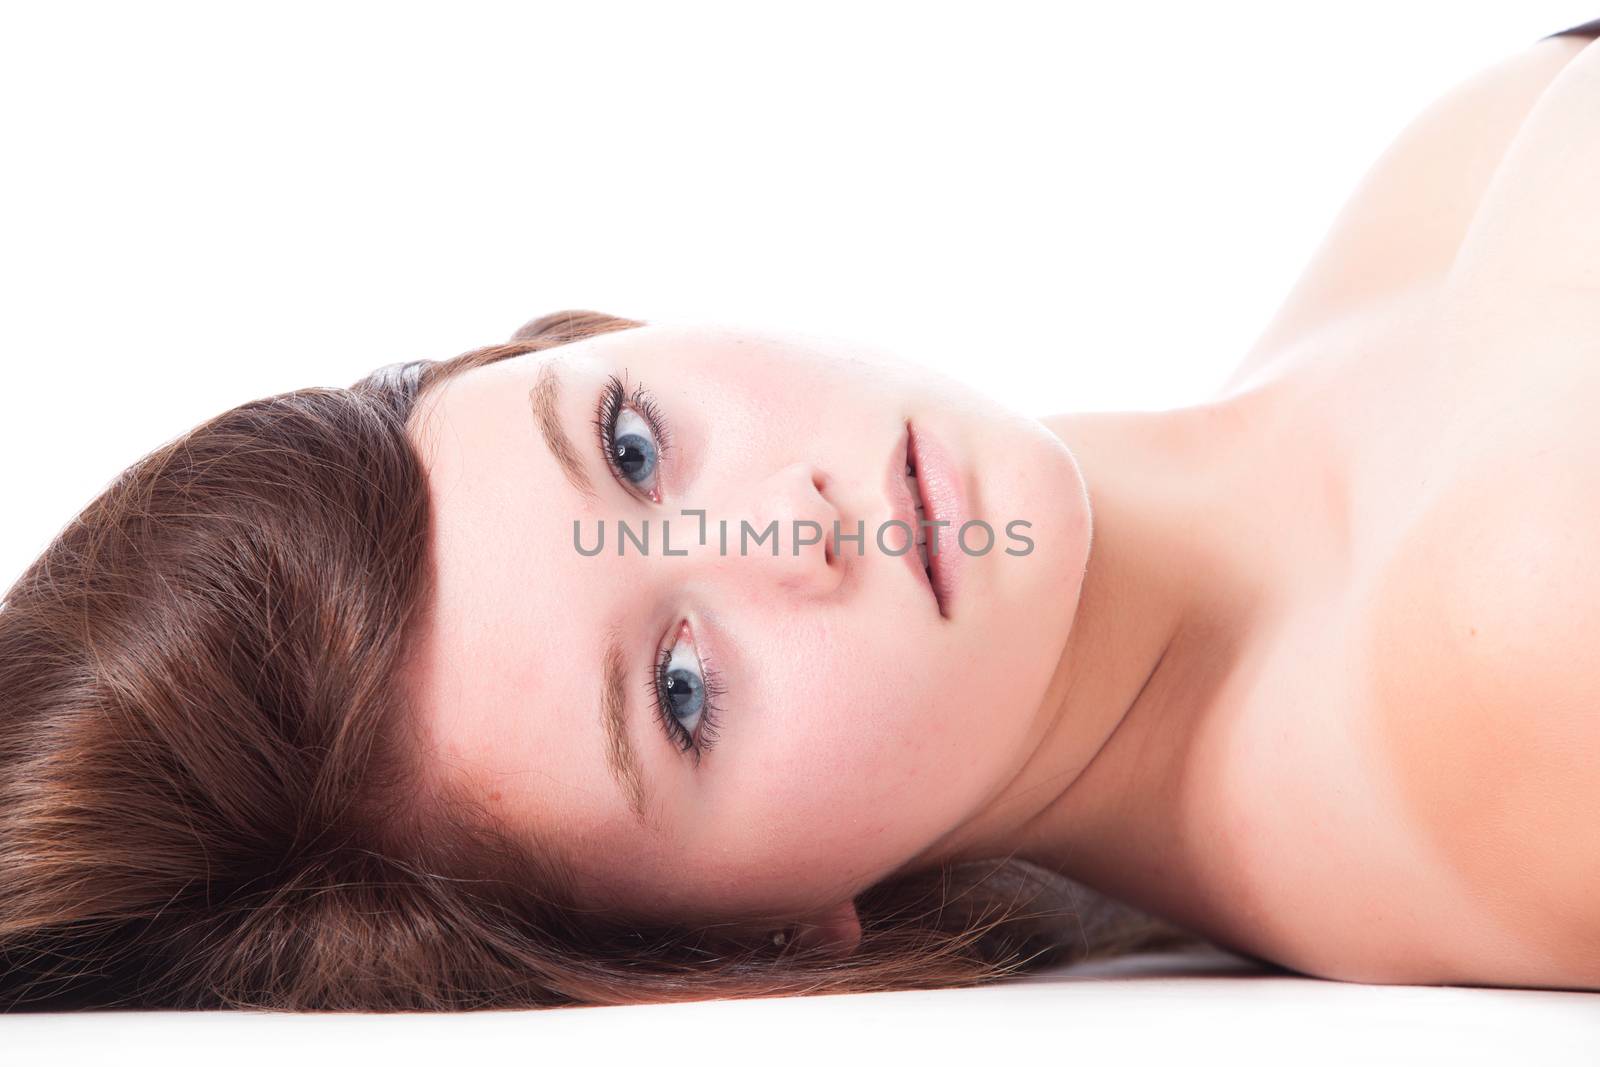 Young beauty woman whith a clear natural skin